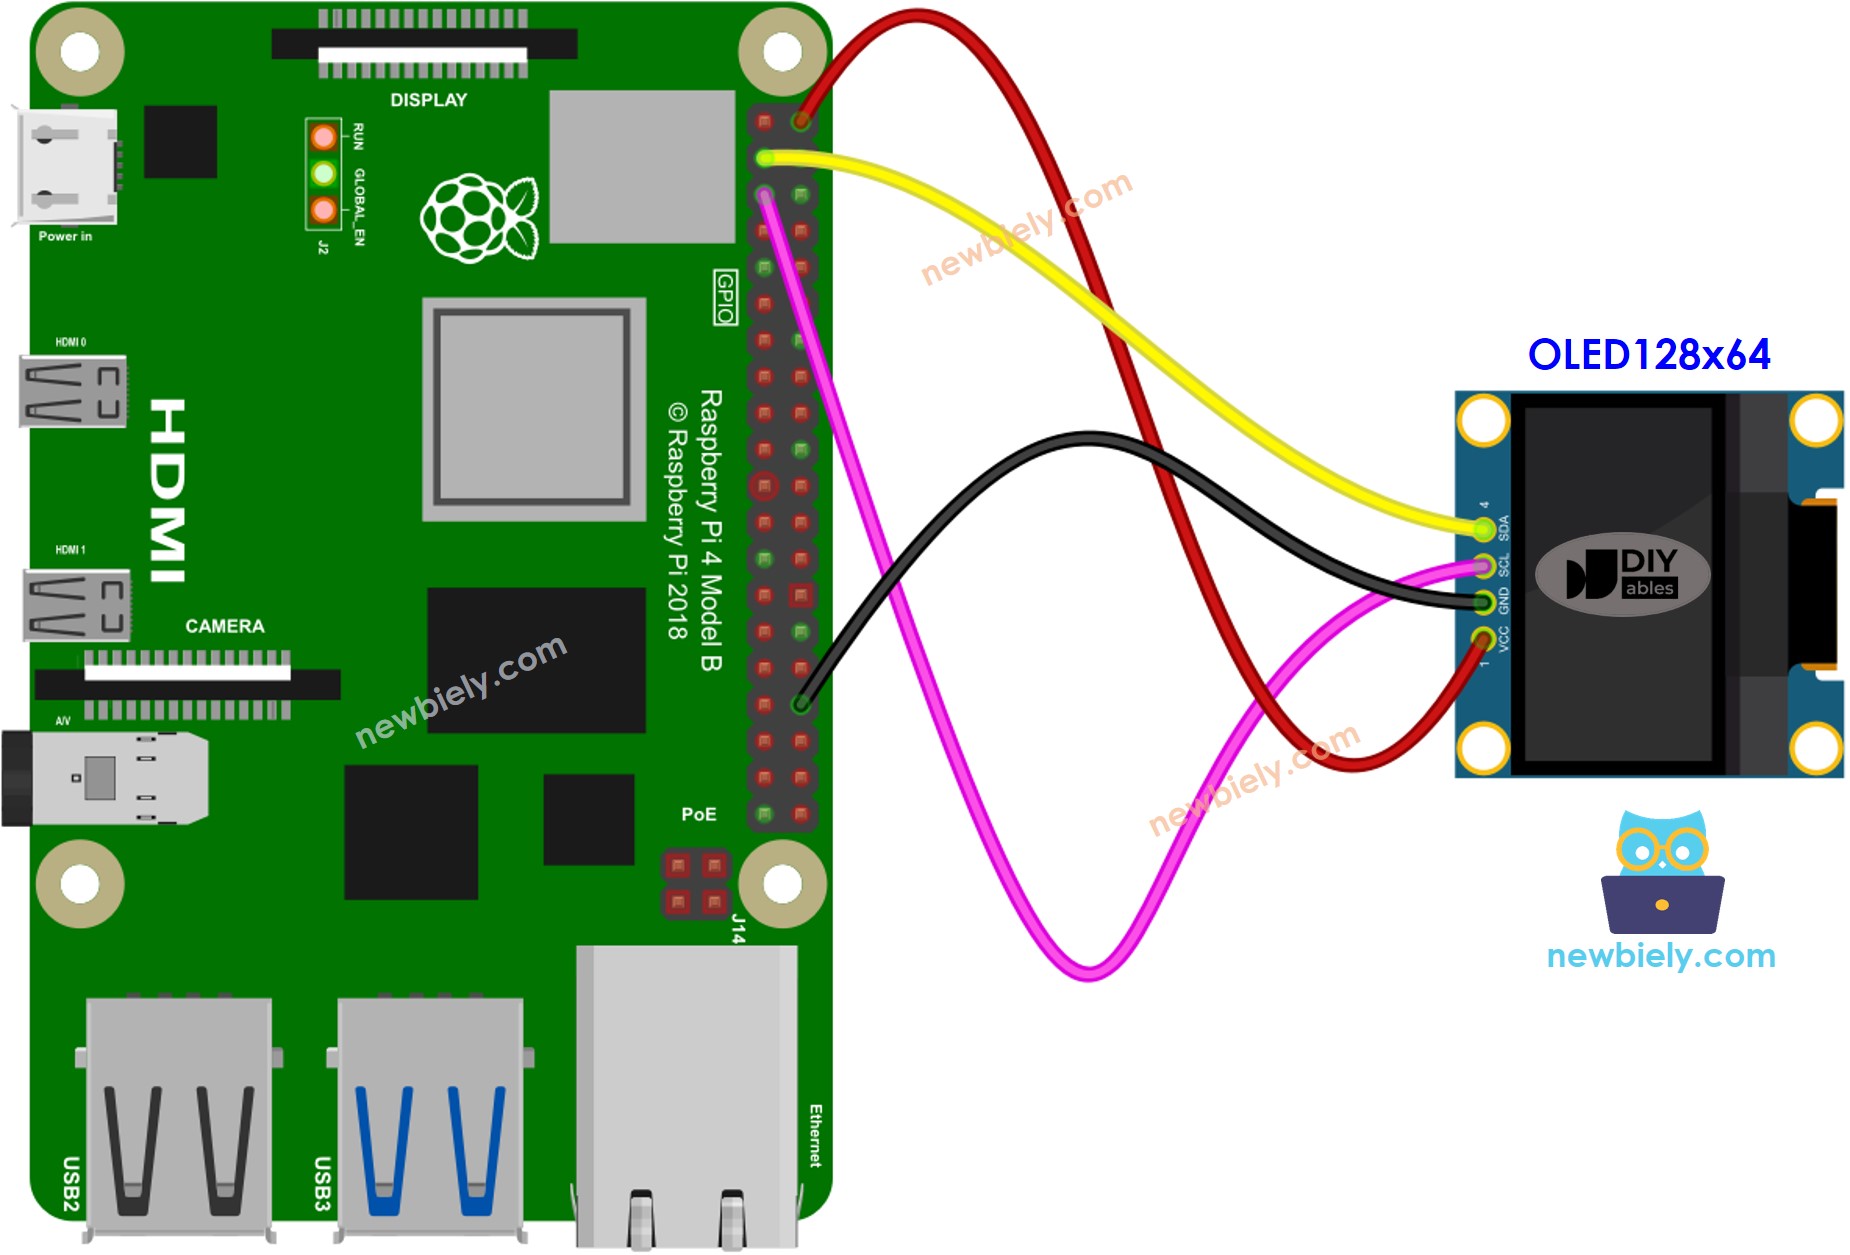 The wiring diagram between Raspberry Pi and OLED